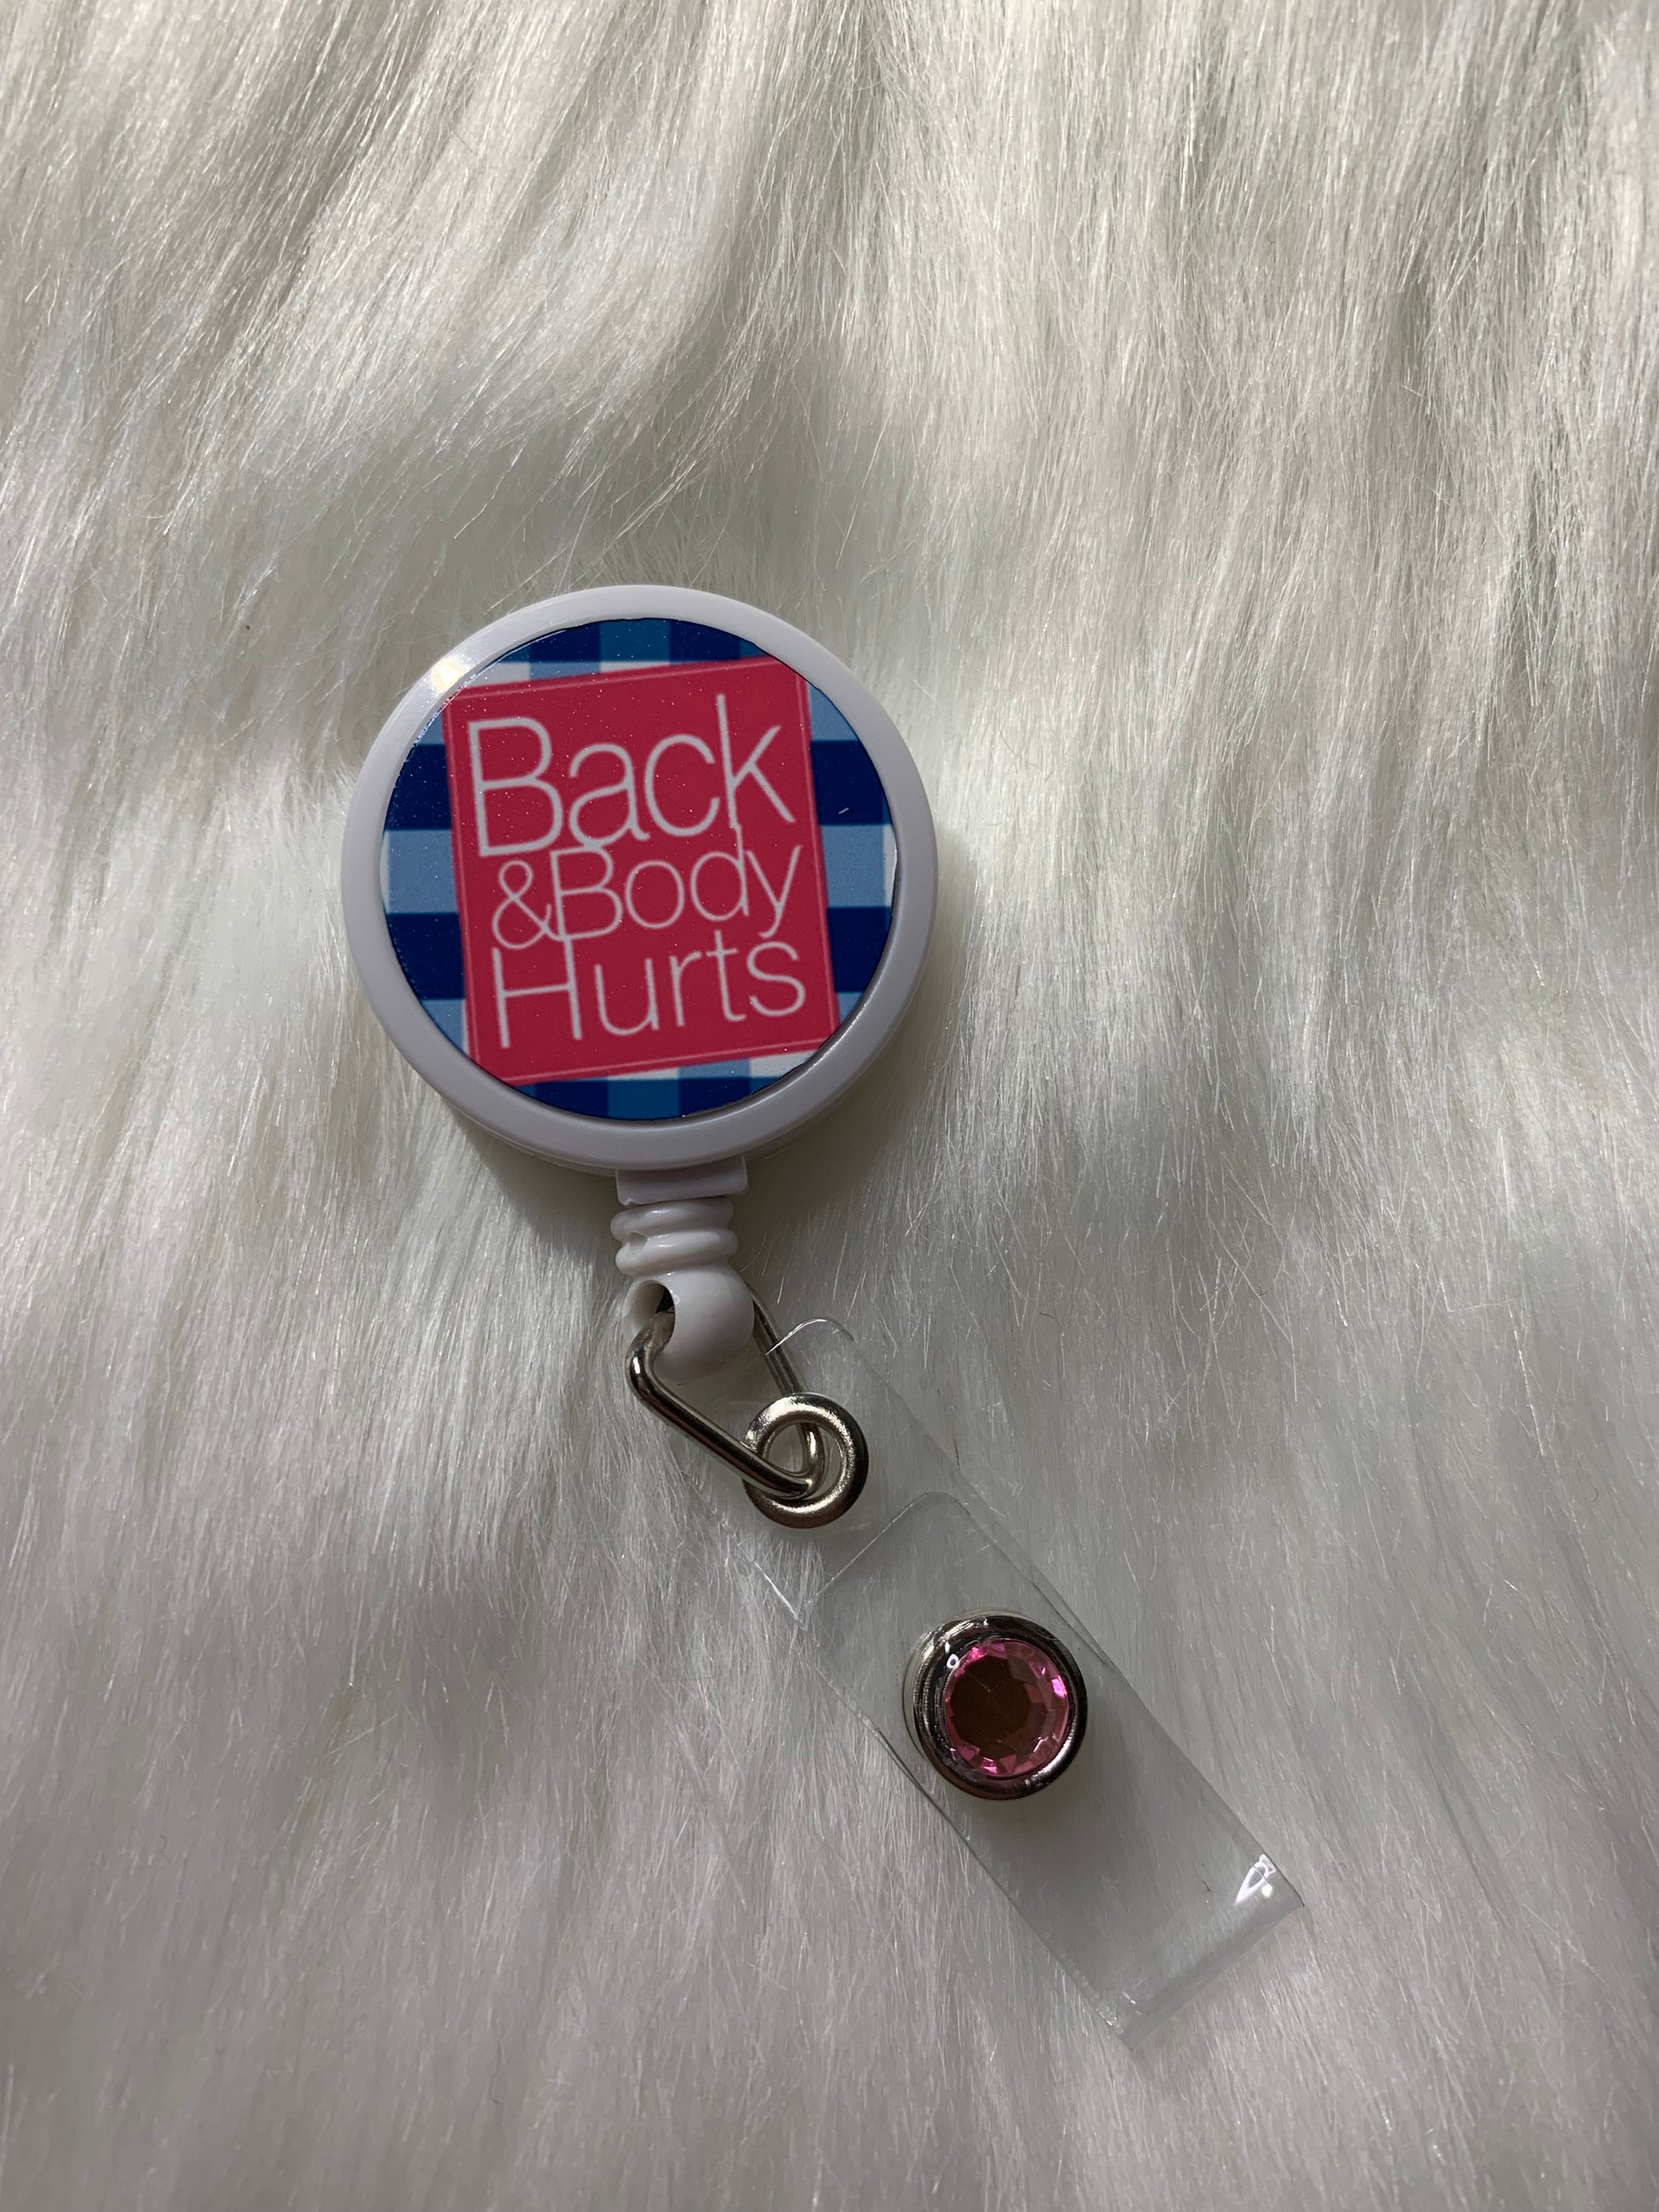 Back and Body Hurts badge reel, funny badge reels